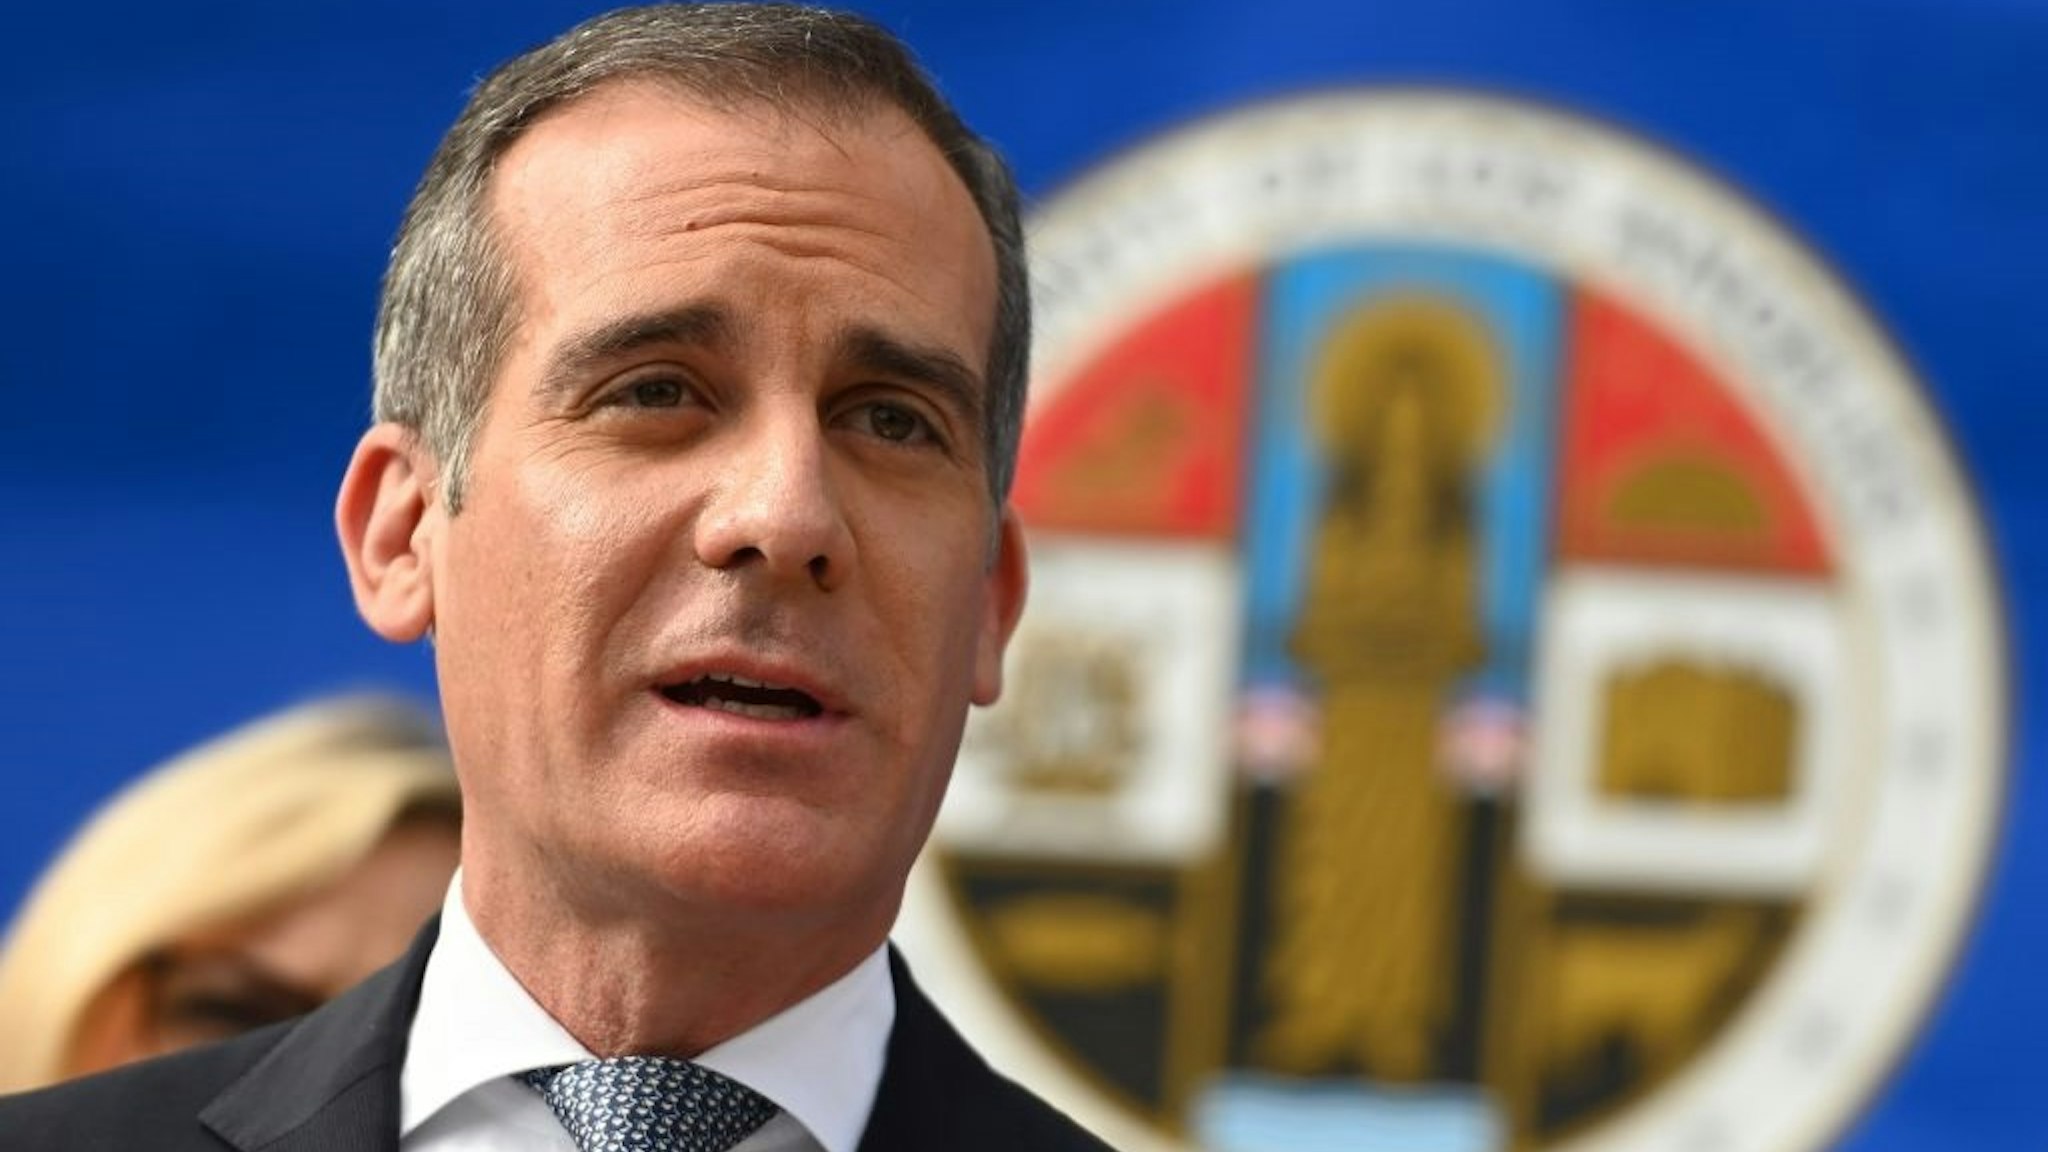 Los Angeles Mayor Eric Garcetti speaks at a Los Angeles County Health Department press conference on the novel coronavirus, (COVID-19)on March 4, 2020 in Los Angeles, California.